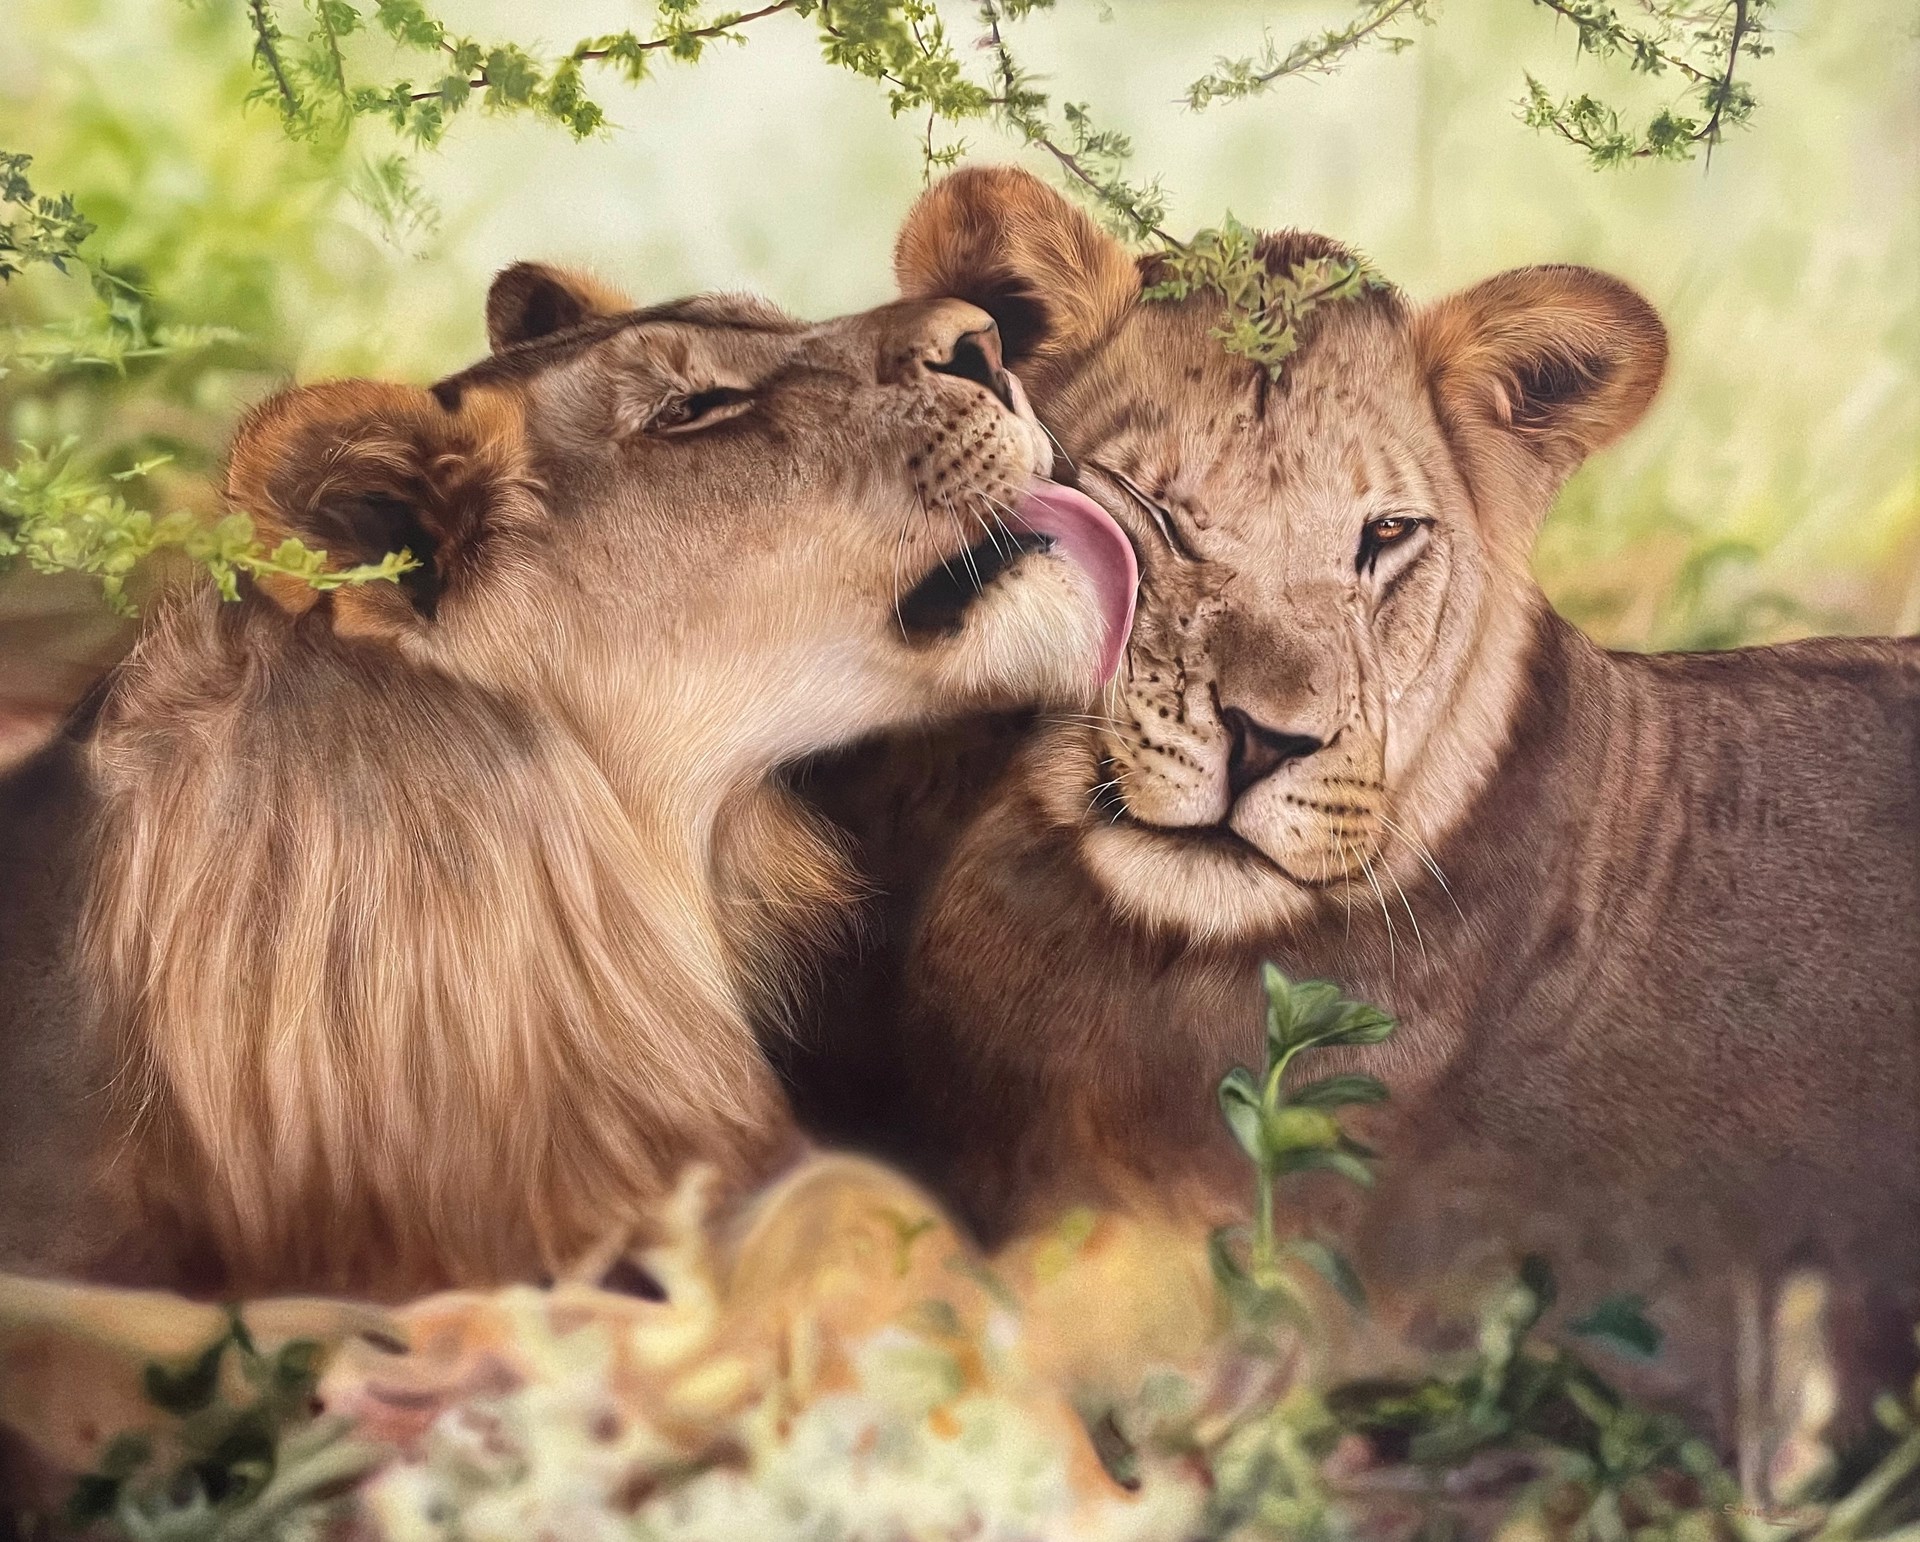 Wild Affection by Silvia Belviso